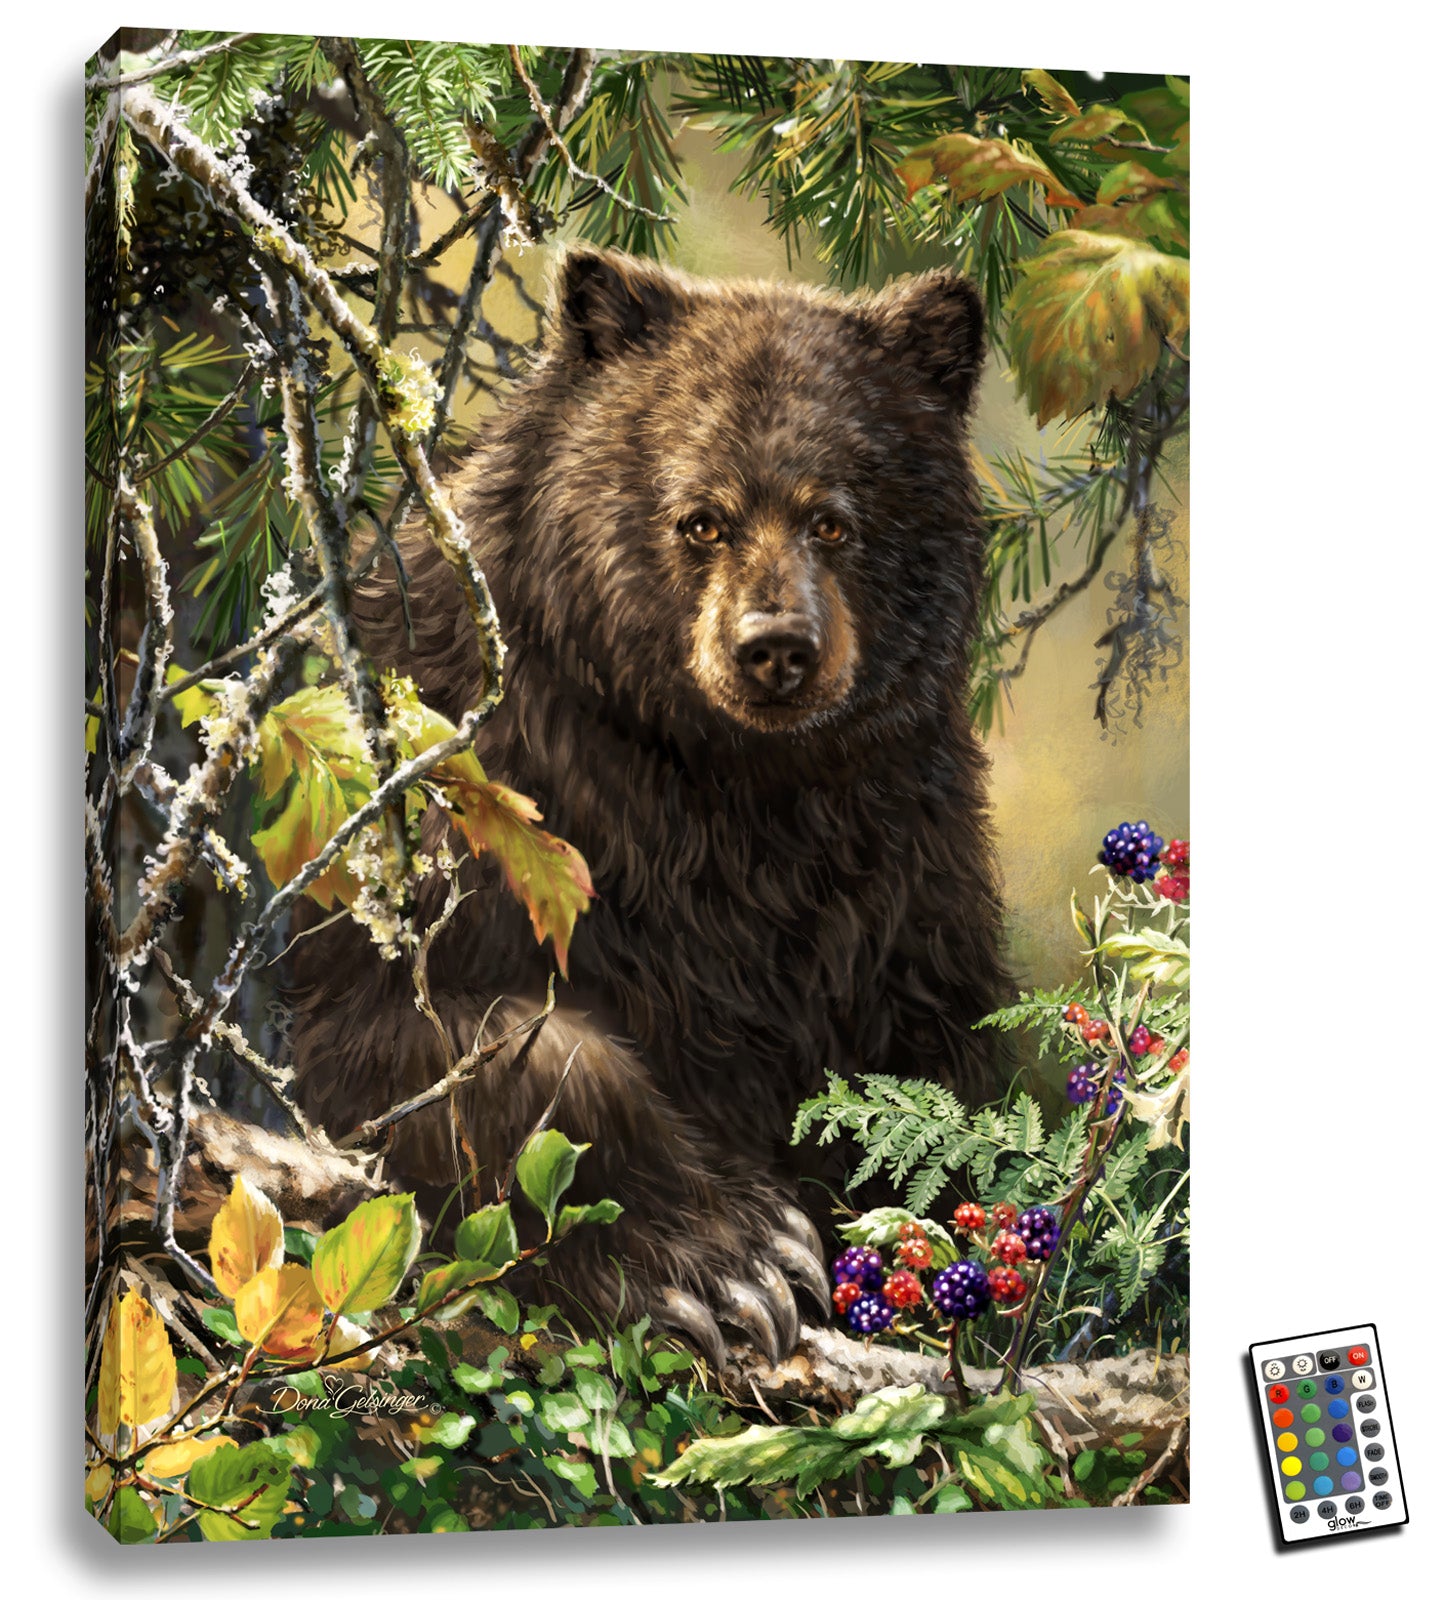 Black Bear Woods 18x24 Fully Illuminated LED Wall Art. This stunning piece features a majestic black bear sitting peacefully in the woods, surrounded by the vibrant hues of red and blue berries.